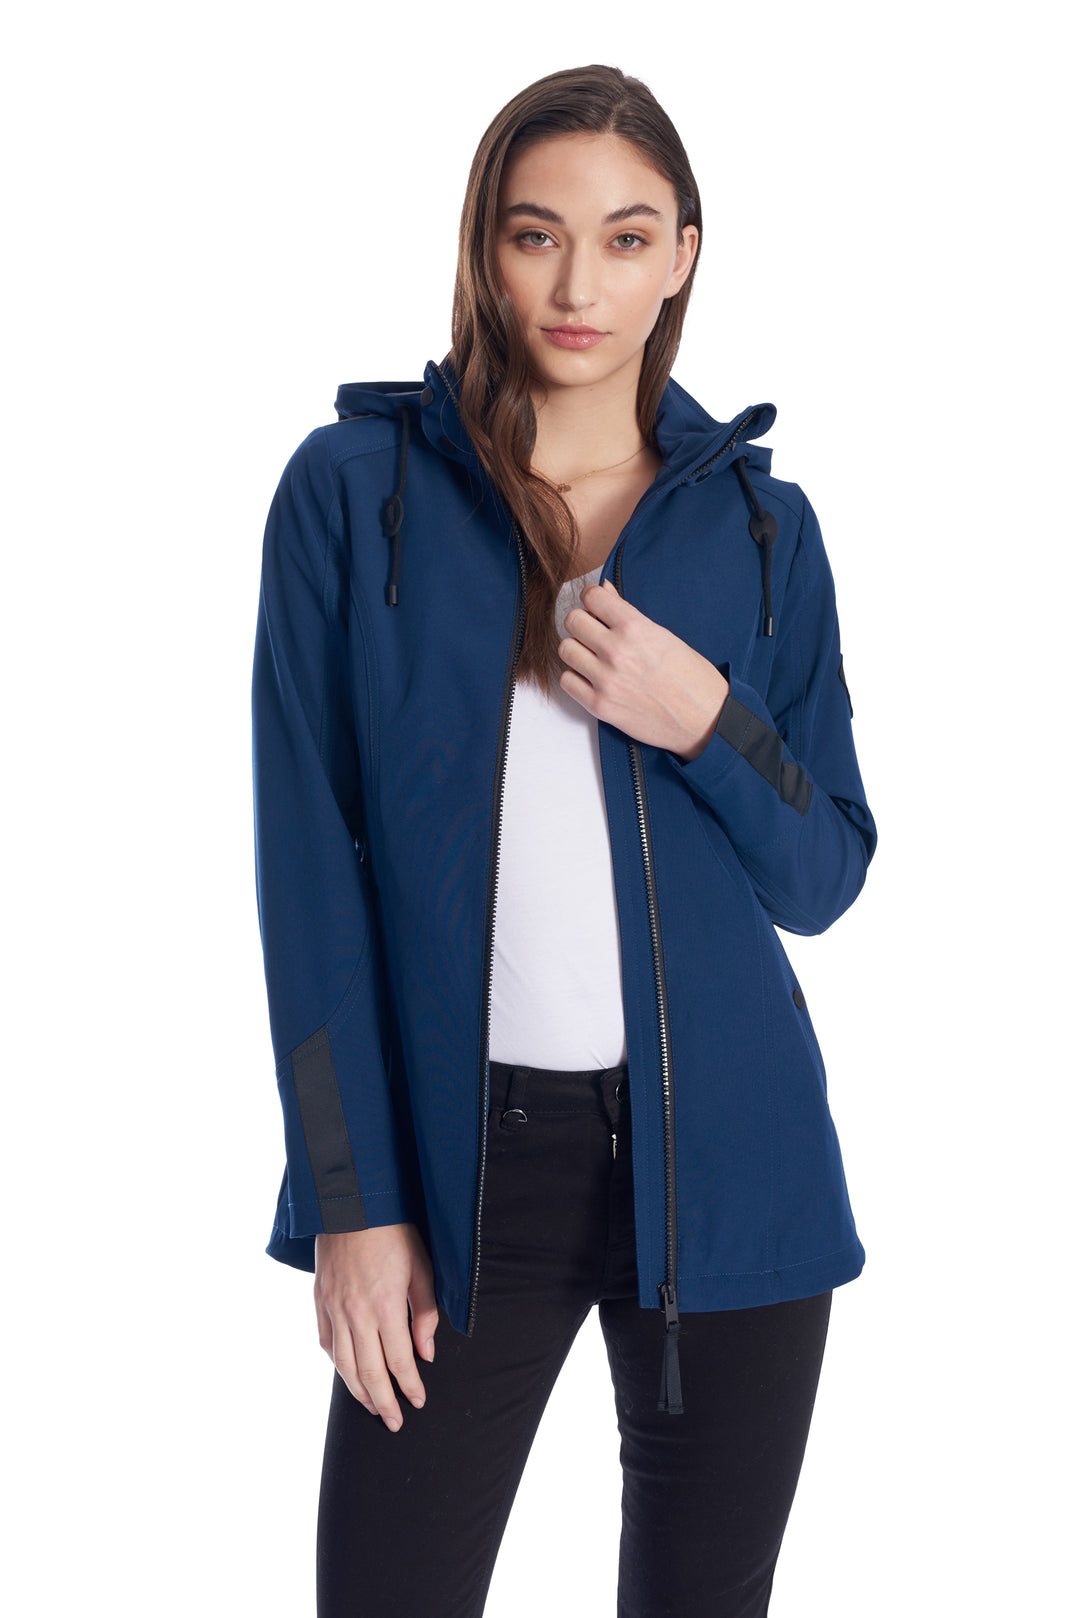 WOMEN'S NAVY LINED SOFTSHELL